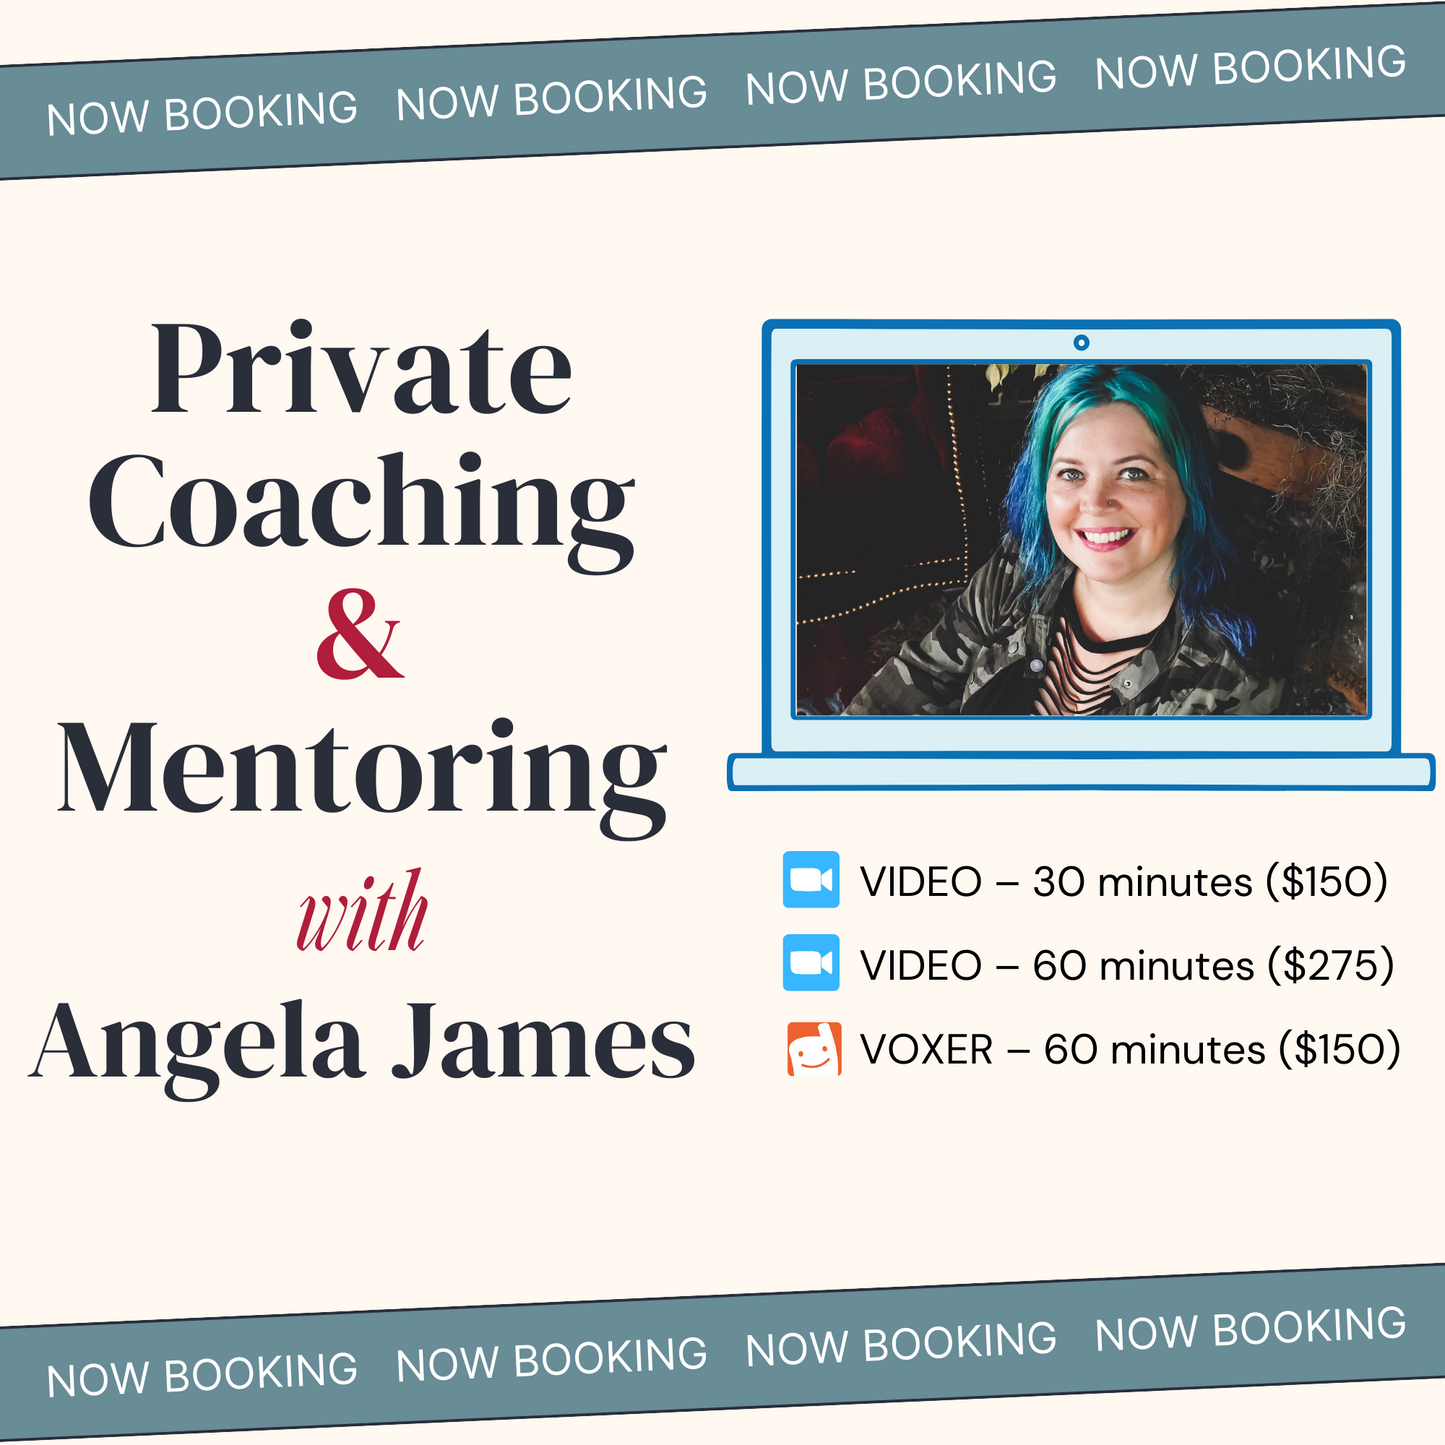 Private Coaching & Mentoring with Angela James